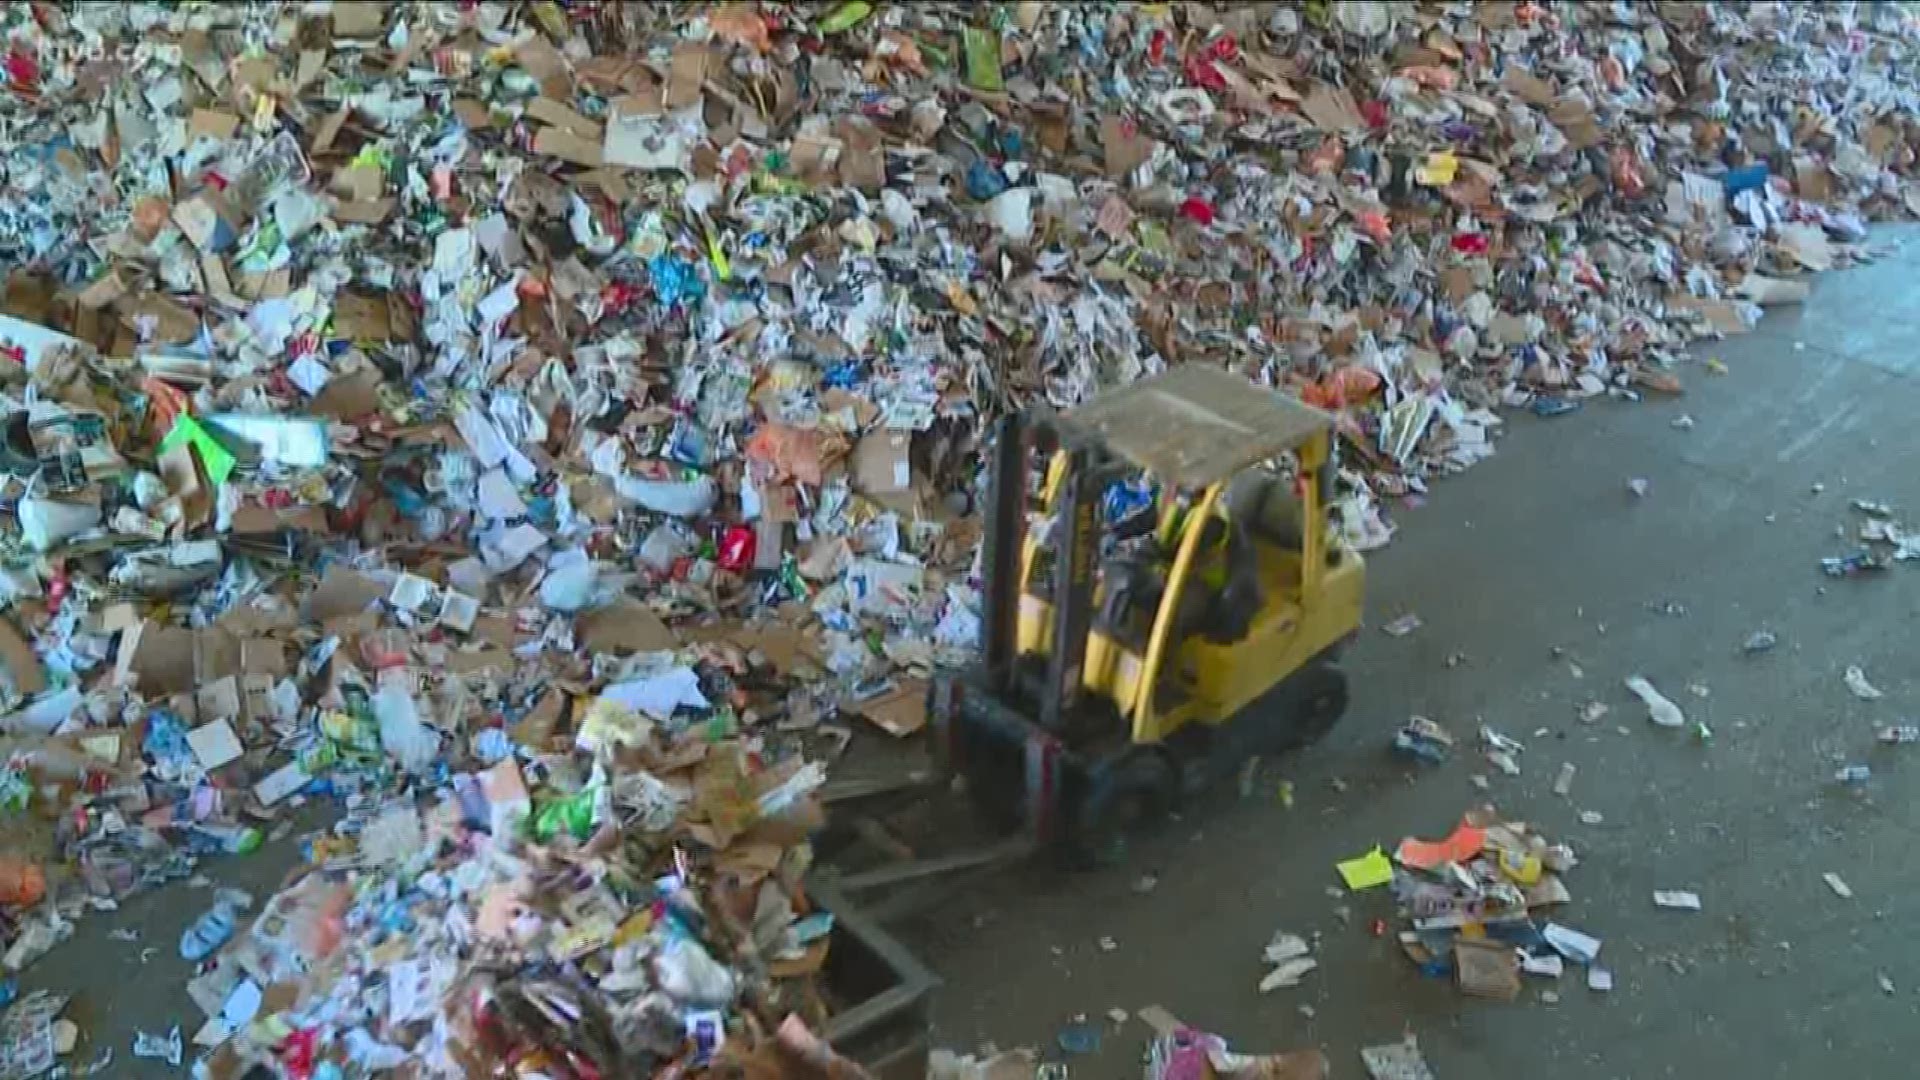 Every day, 150 tons of recyclable trash is picked up in Boise and dumped onto the floor of a recycling facility to be sorted by hand.